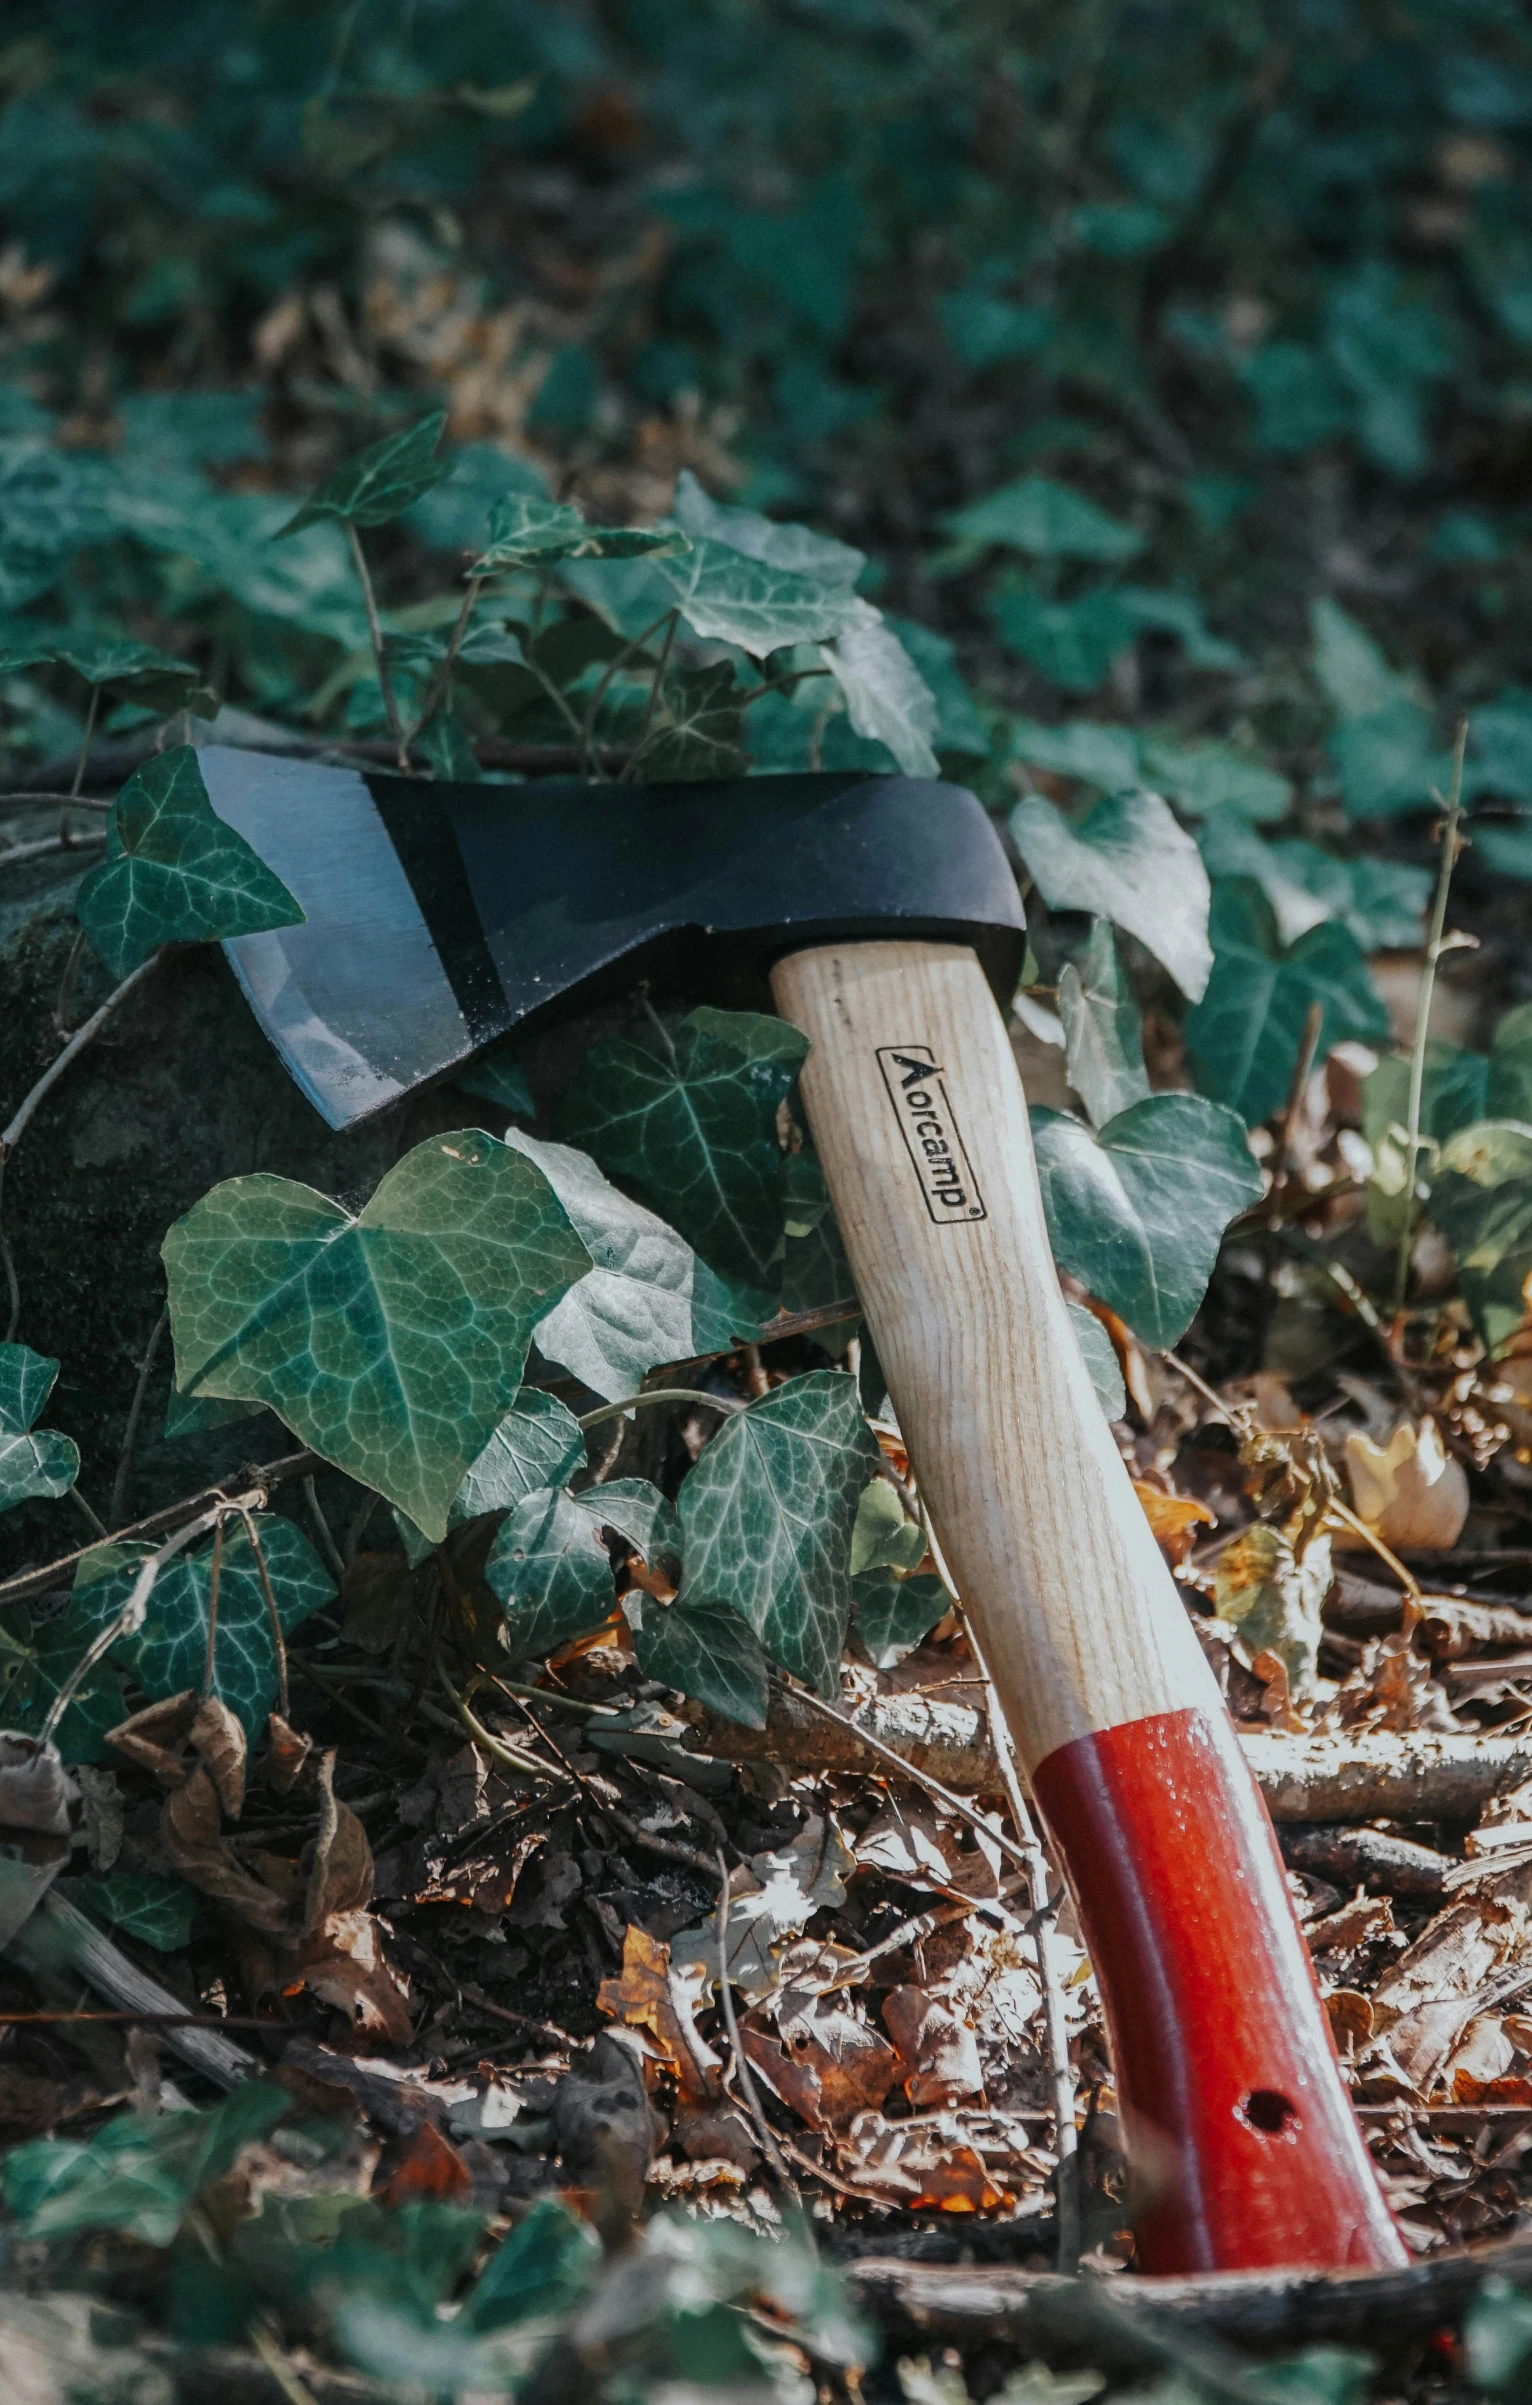 an axamail with a wood handle and leaf cutter in a pile of leaves